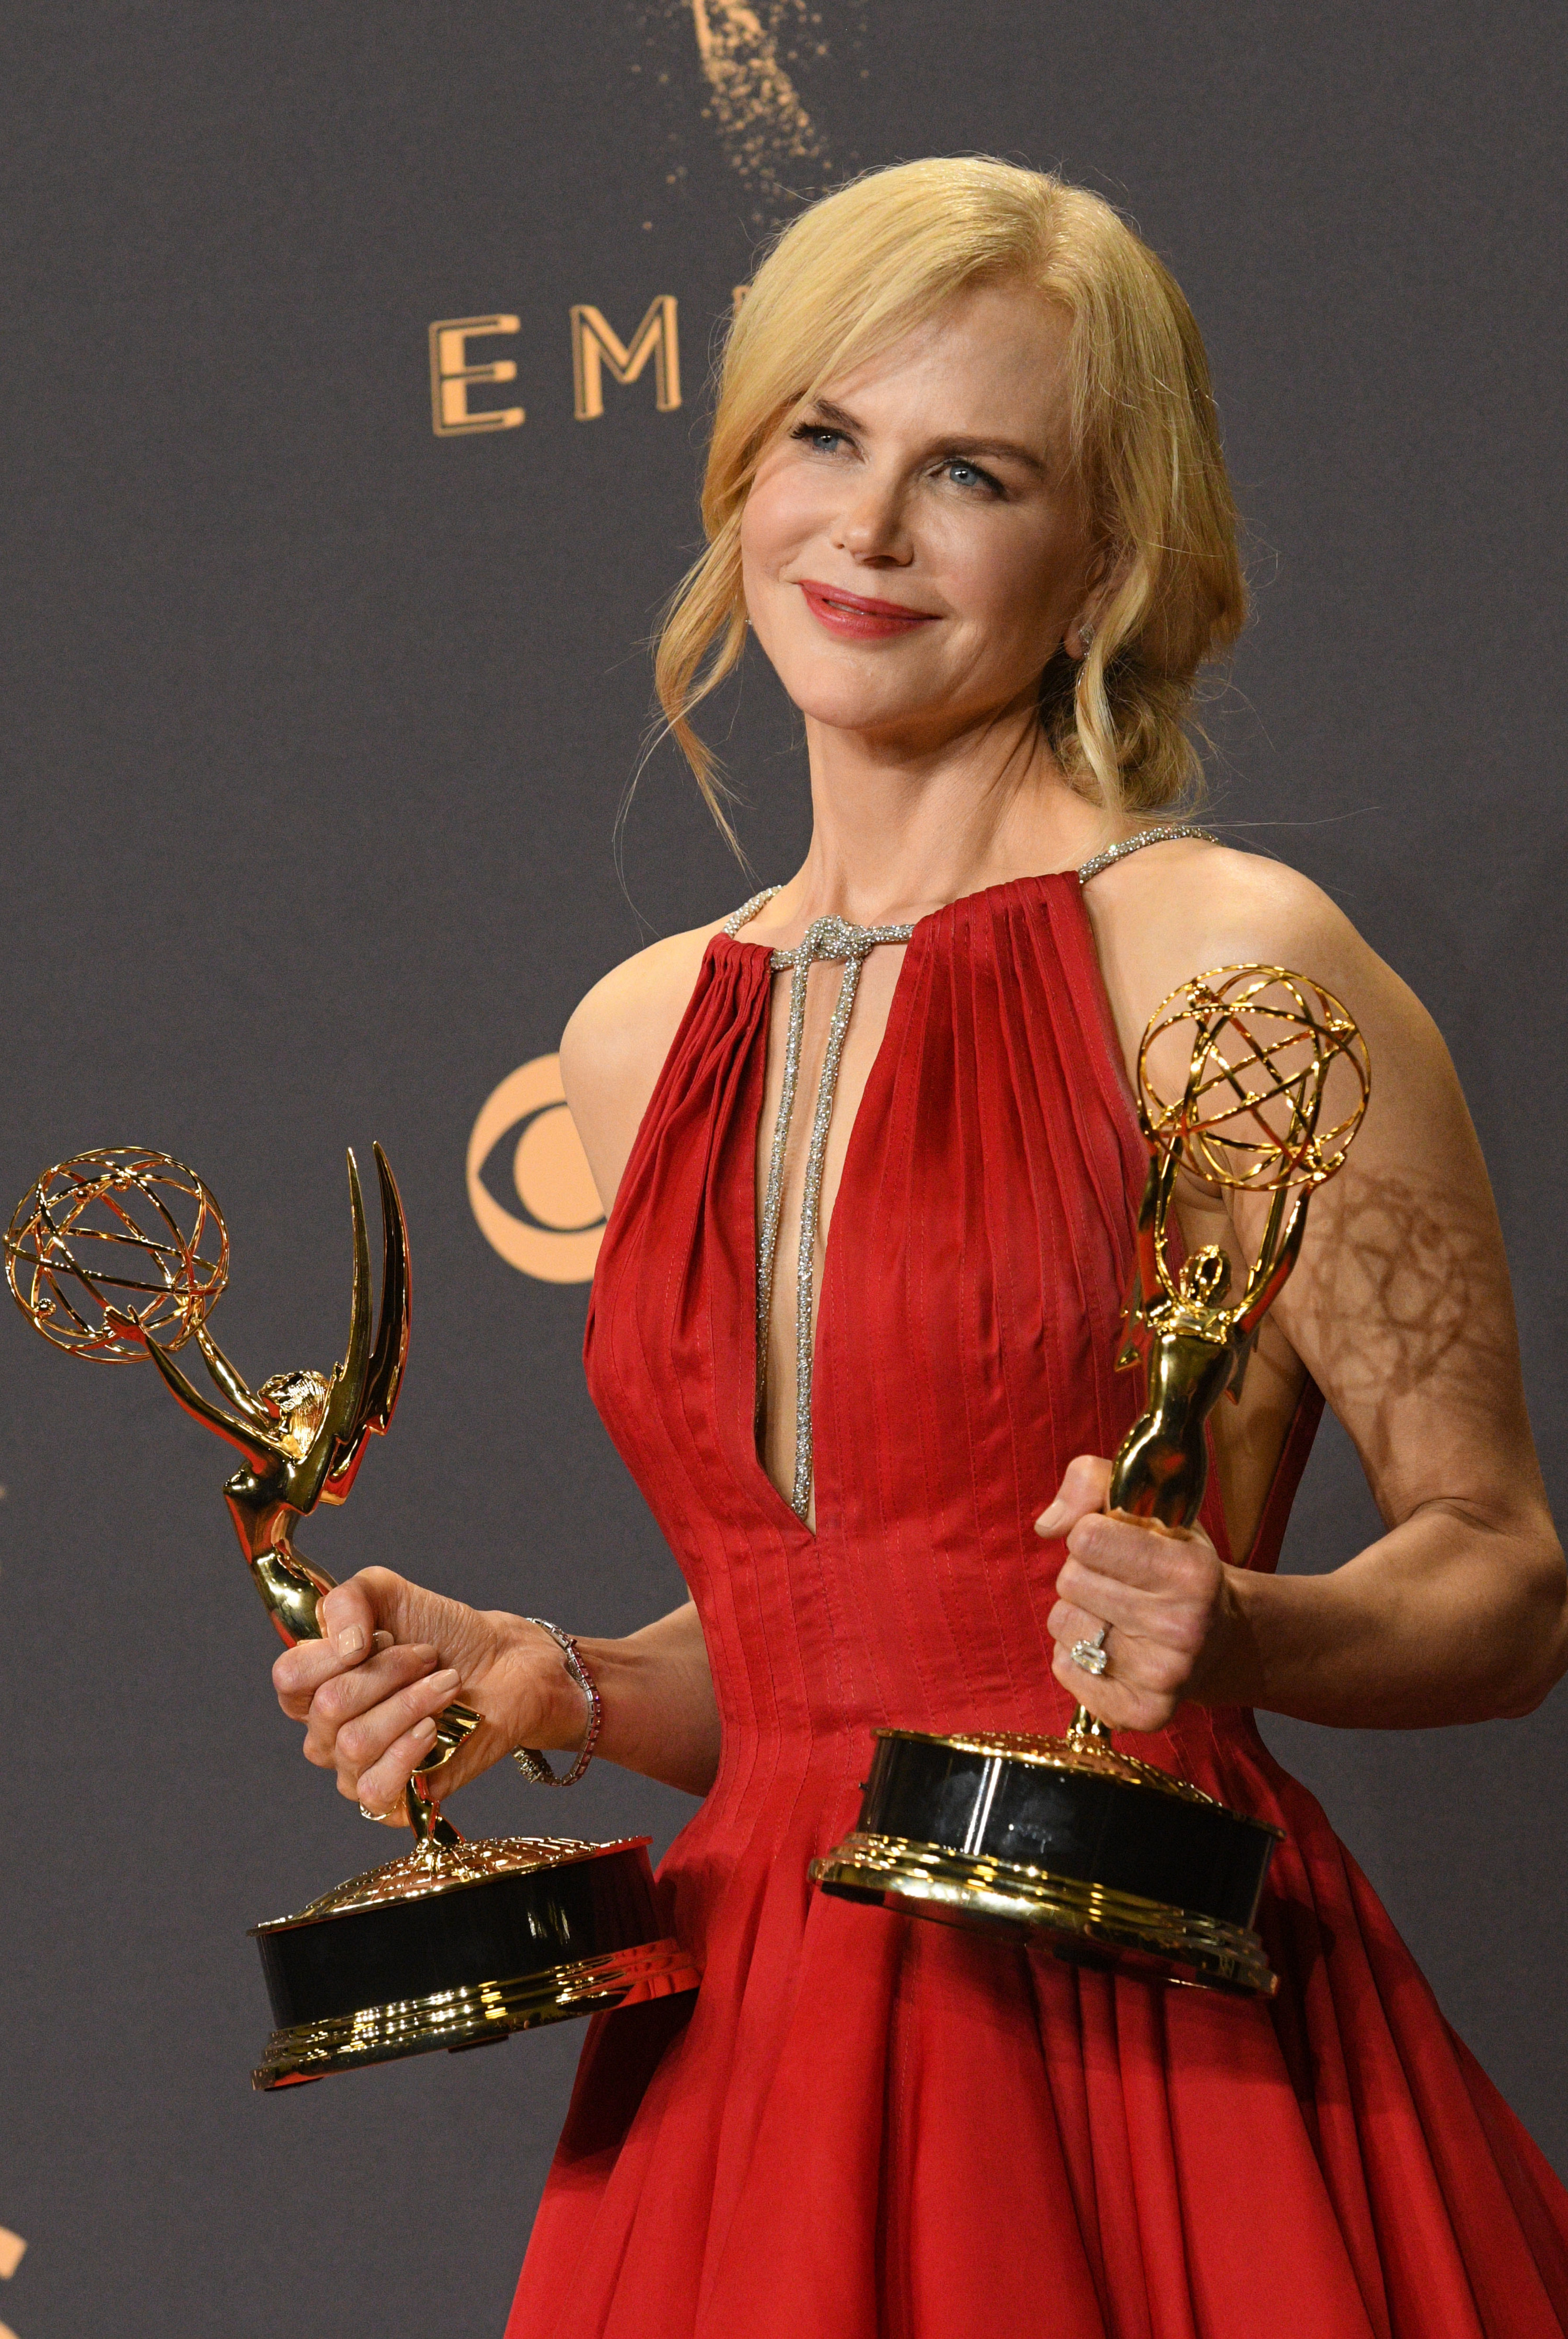 Nicole Kidman in a red dress holding two Emmys